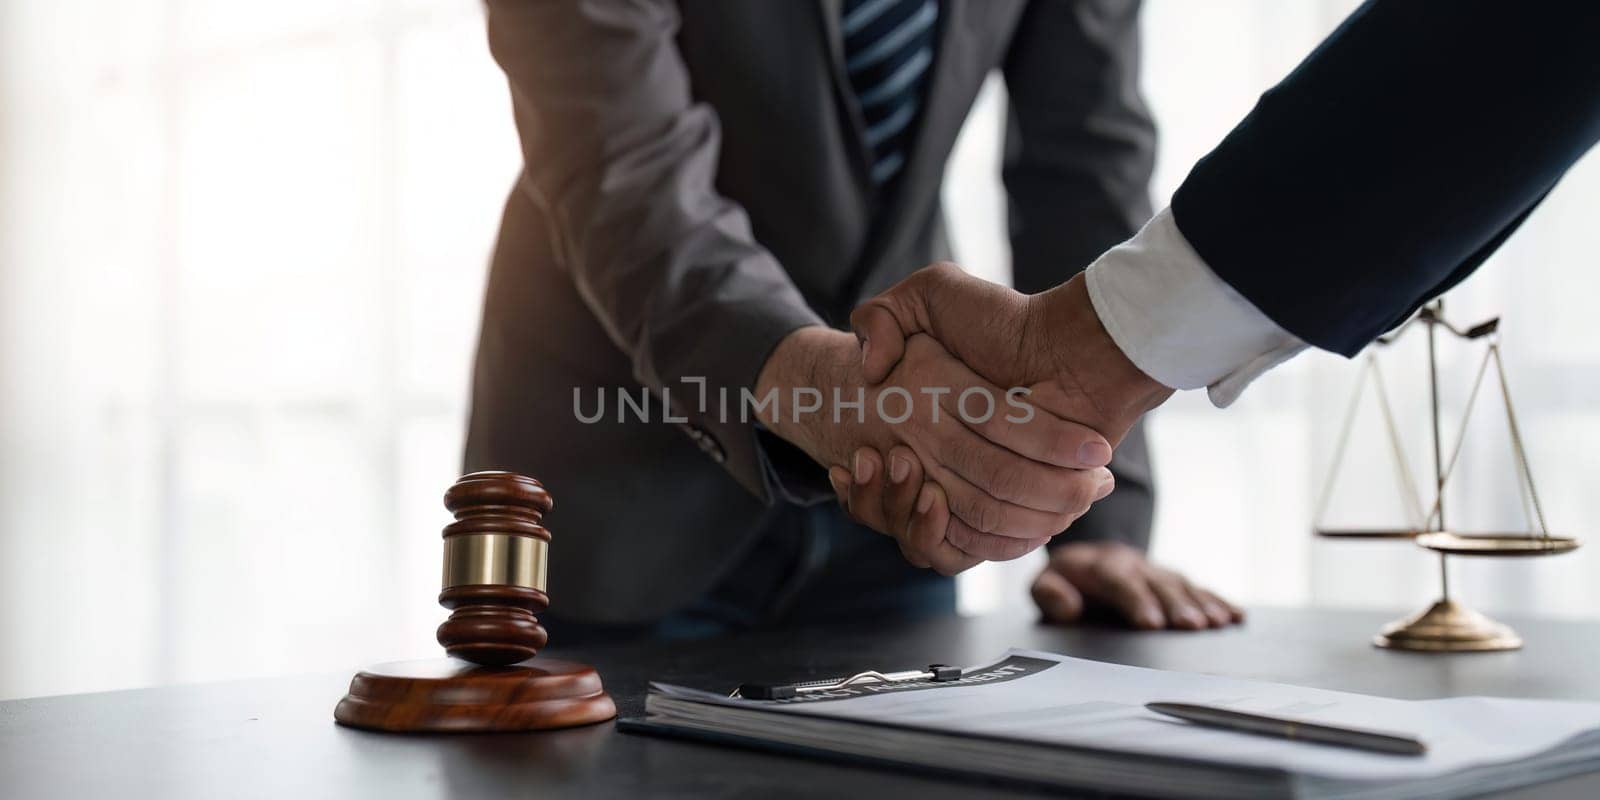 Handshake after cooperation between attorneys lawyer and clients discussing a contract agreement legal fighters, Concepts of law, advice.